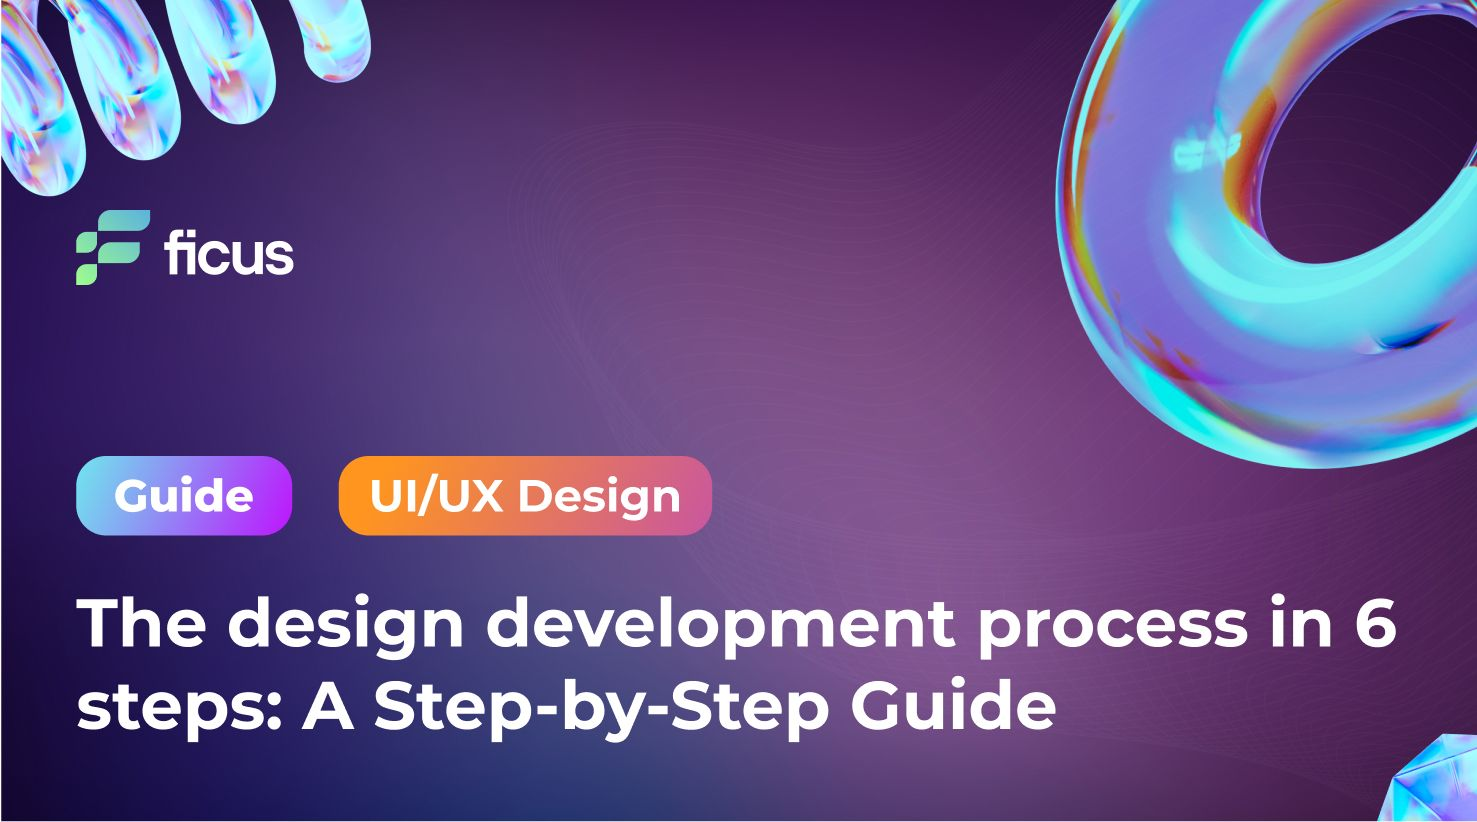 The design development process in 6 steps: A Step-by-Step Guide